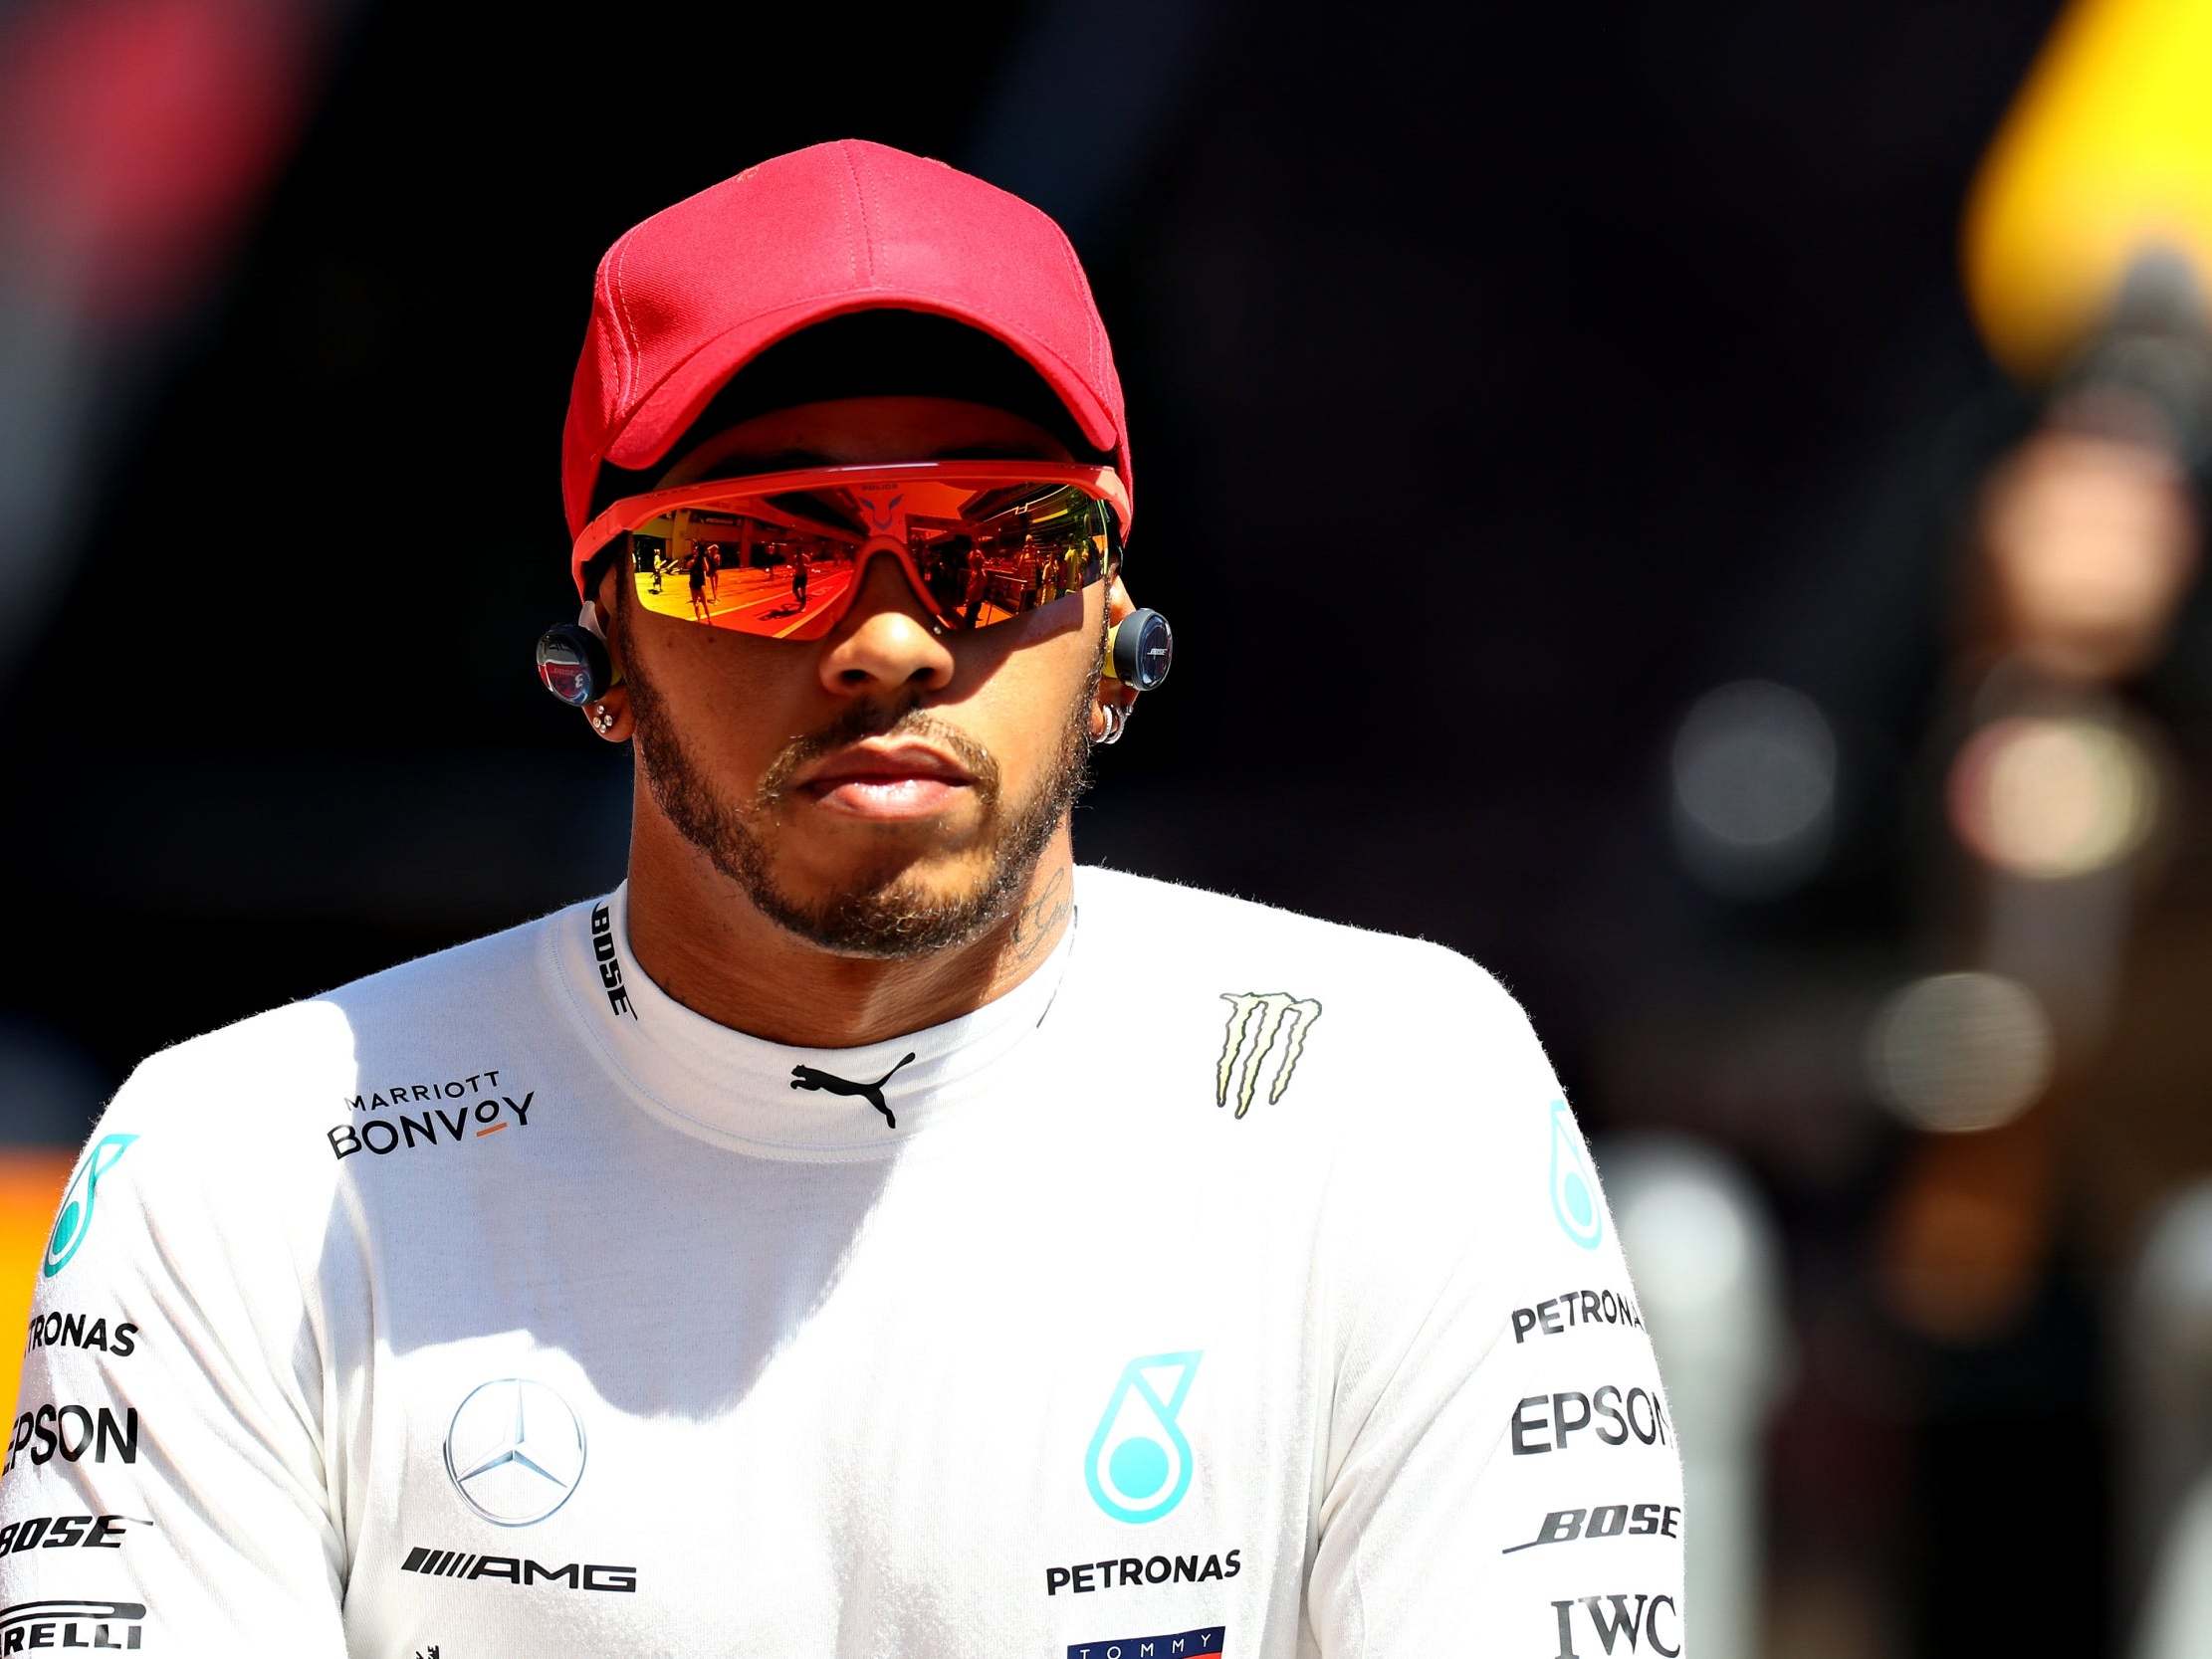 Lewis Hamilton finished in fifth